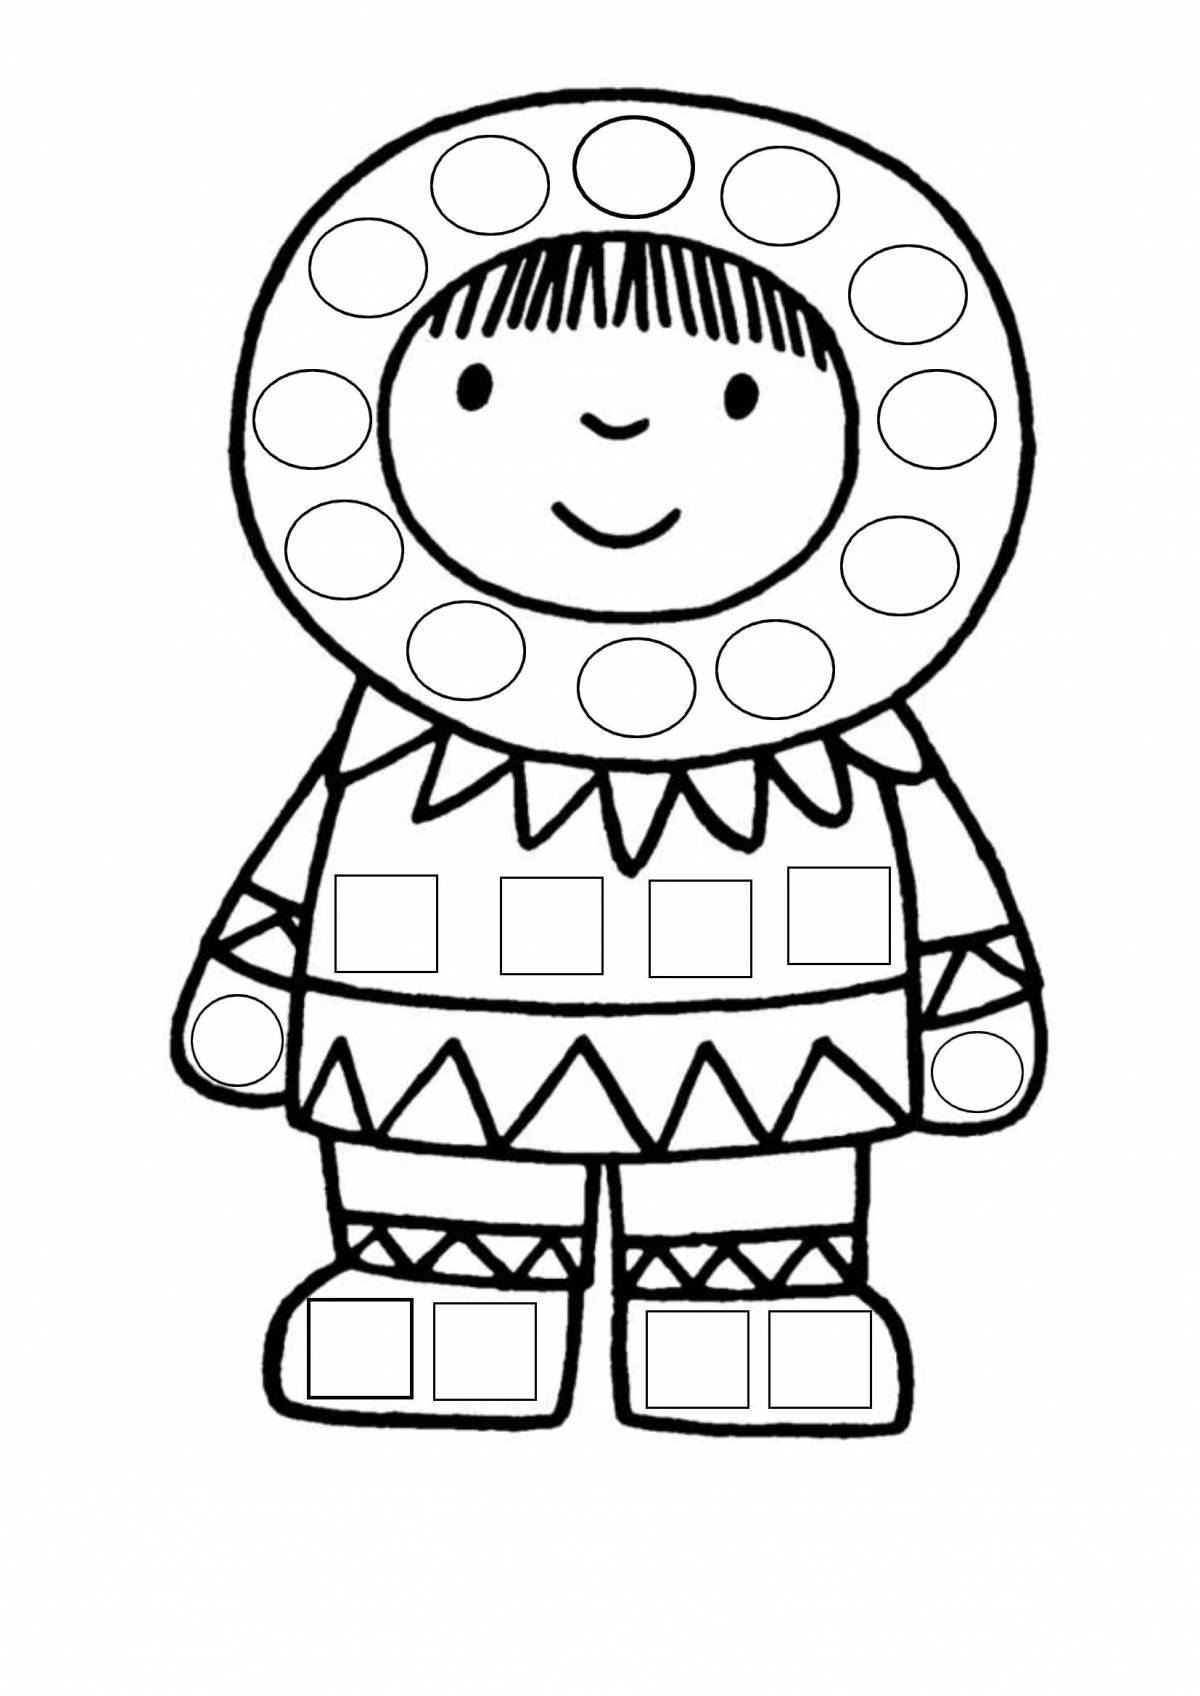 Coloring page decorated Chukchi national costume